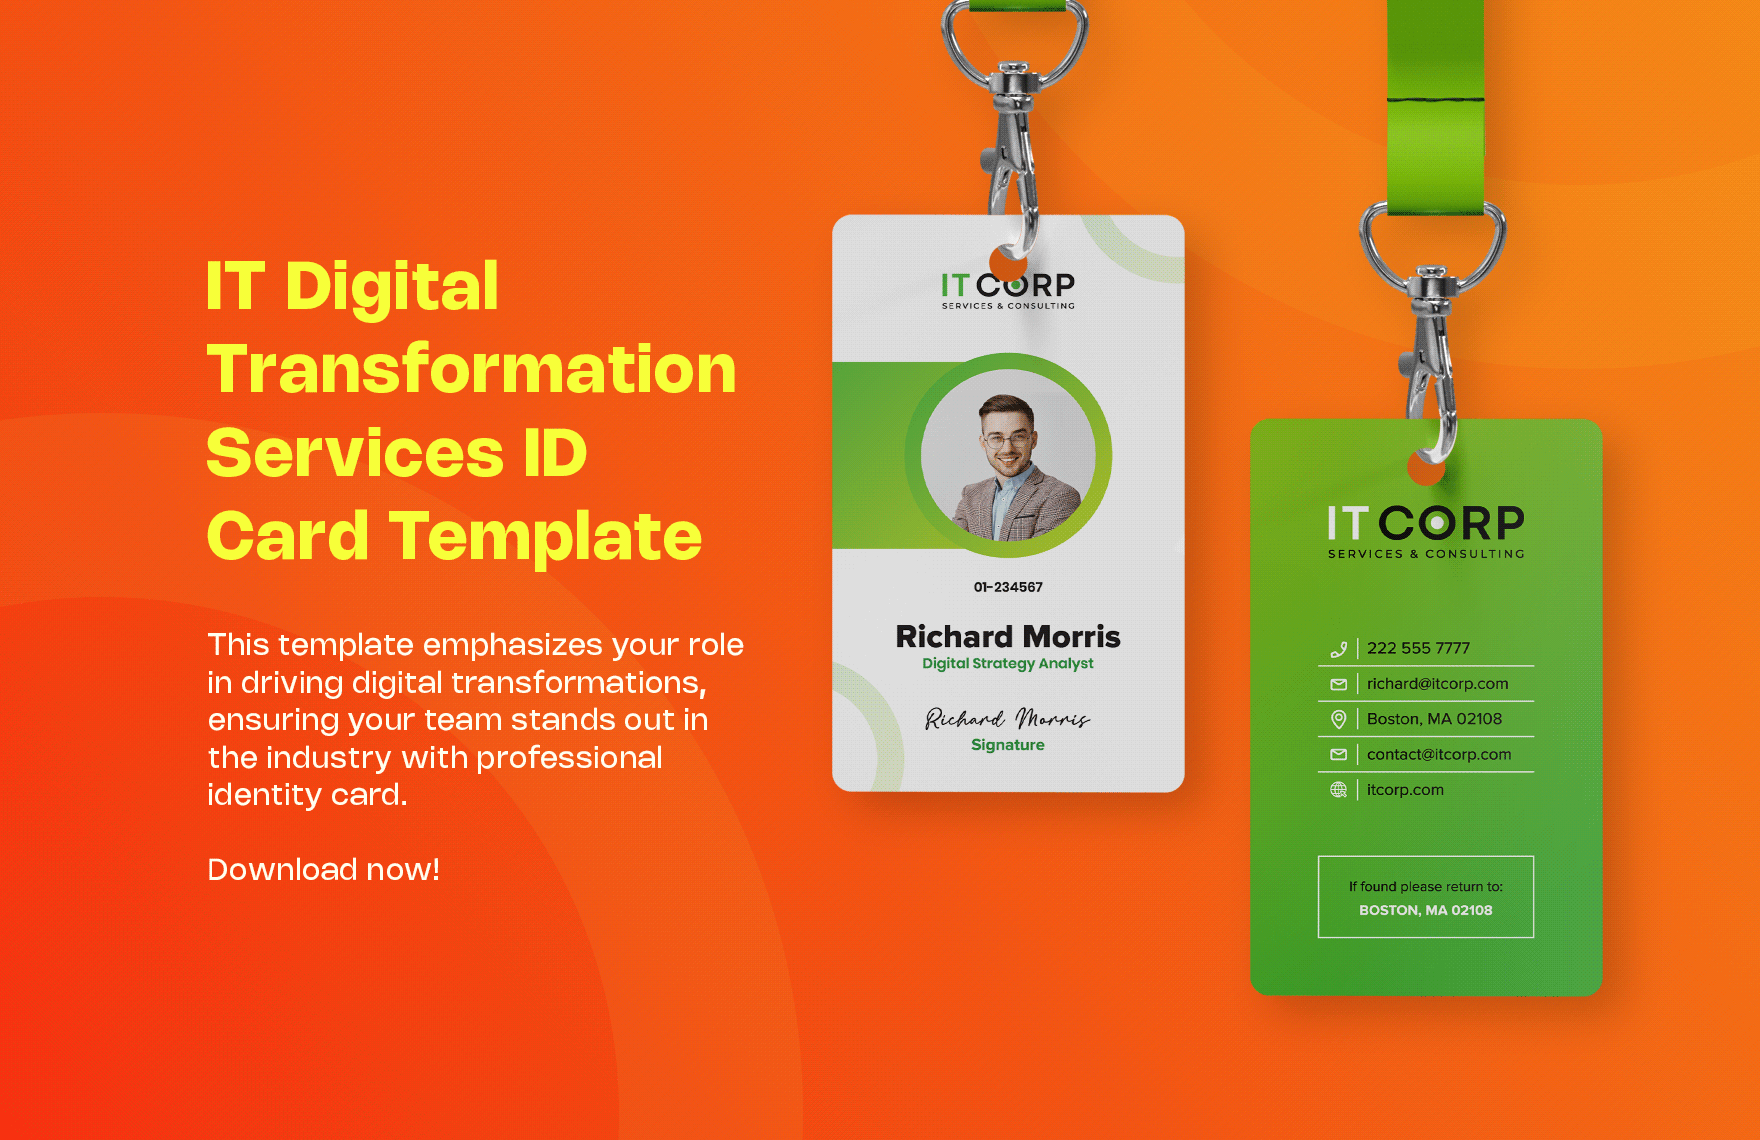 IT Digital Transformation Services ID Card Template in Word, Illustrator, PSD